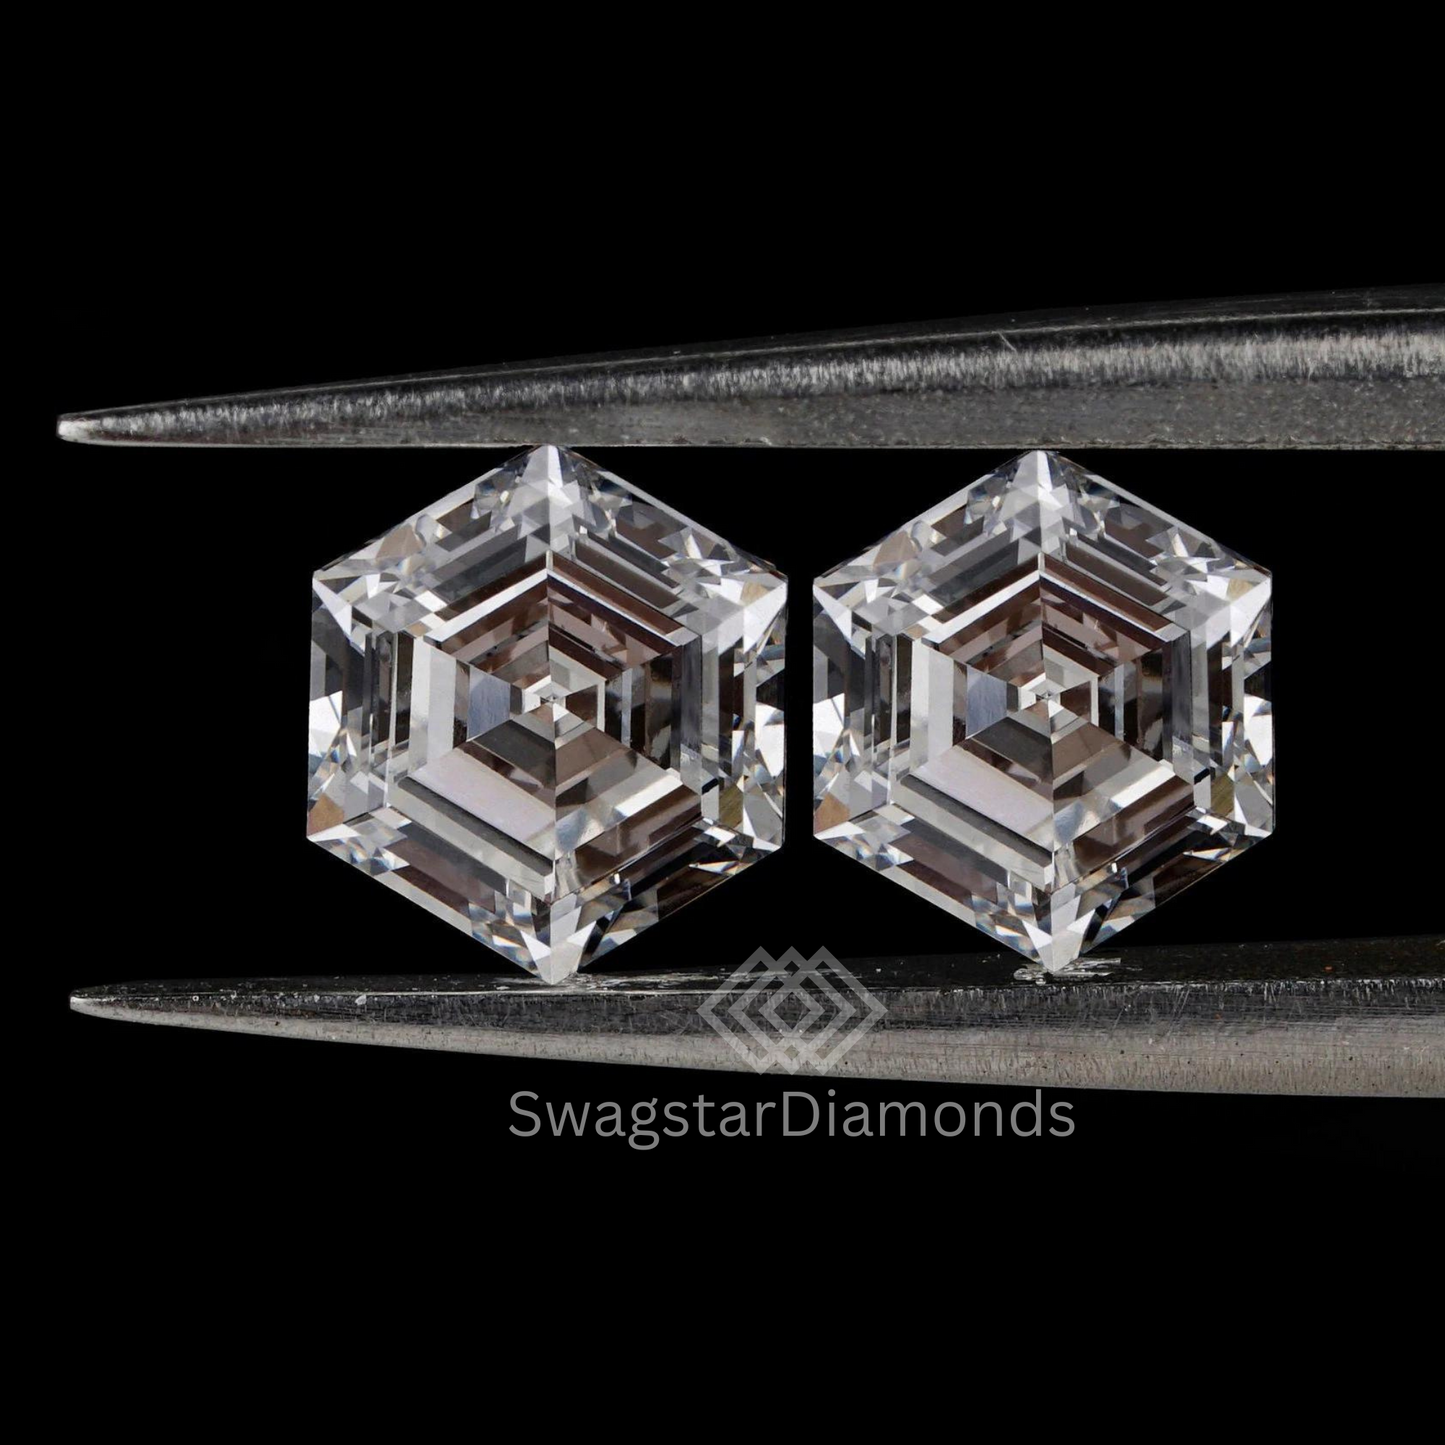 Hexagon Shape Diamonds With Lab-Grown & Natural Diamonds, Jewelry By Leading Manufacturer From Swagstar, Surat. Explore Wedding, Engagement, Eternity Rings, Earring & Studs, Bracelets In 10k, 14k, & 18k Gold Varieties, Including White, Yellow, Rose Gold.